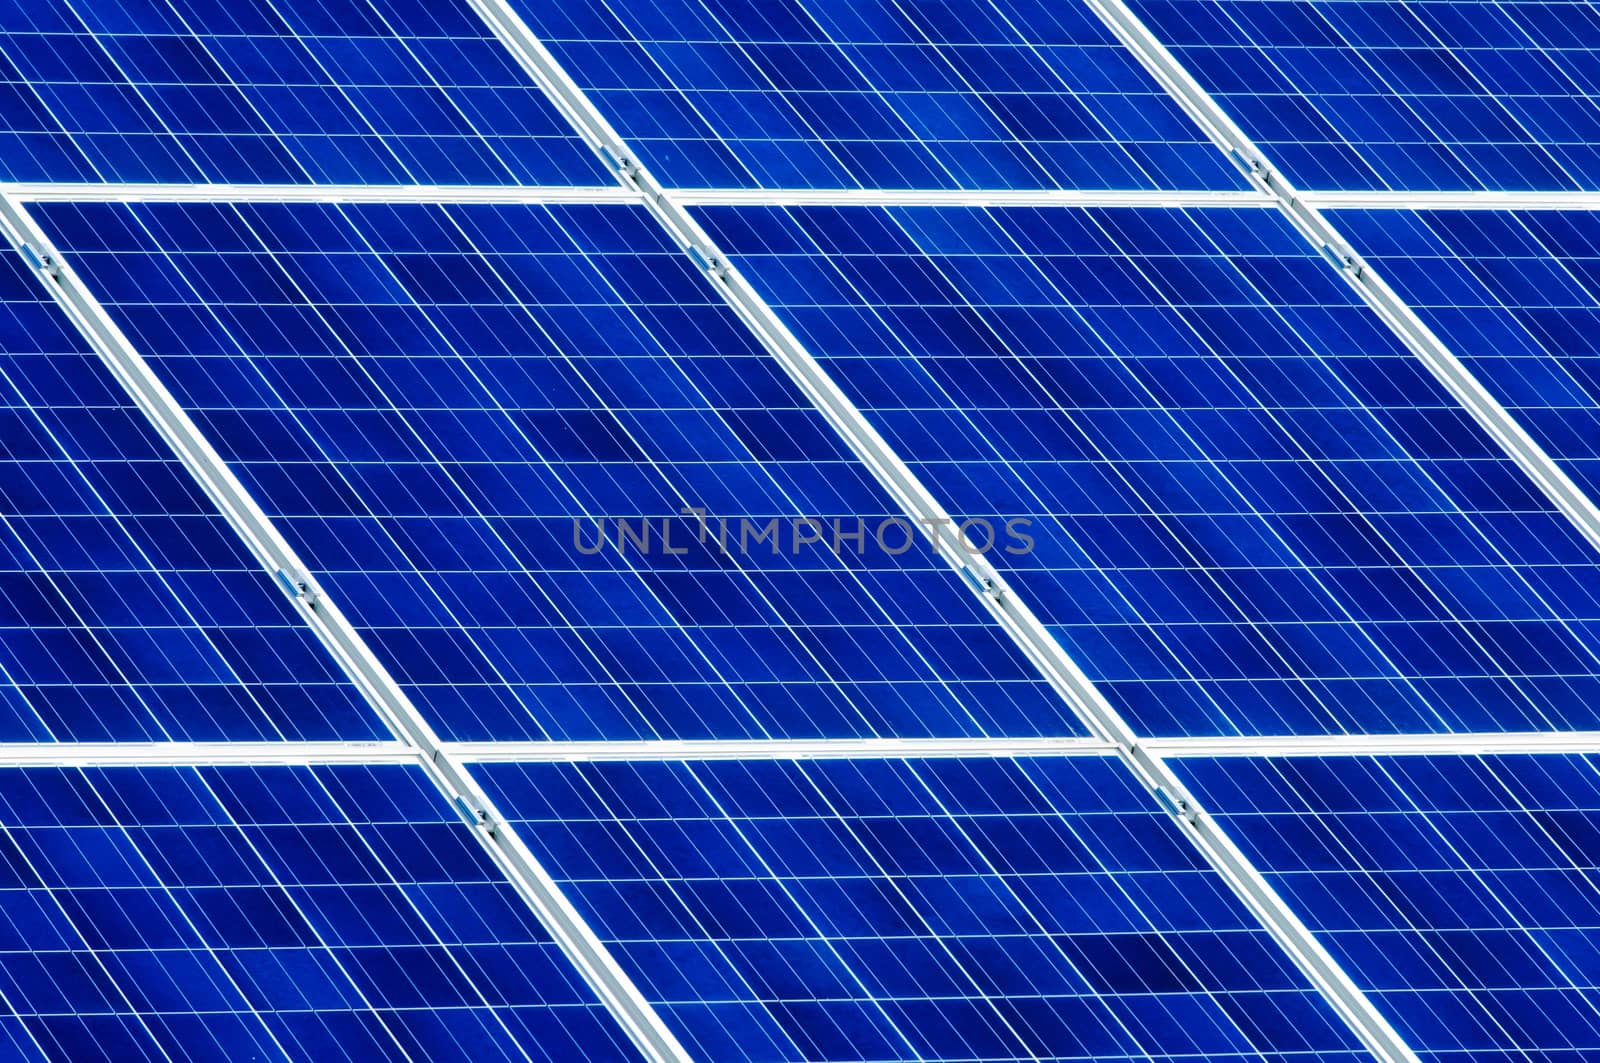 Photovoltaic solar cell panels by horizonphoto